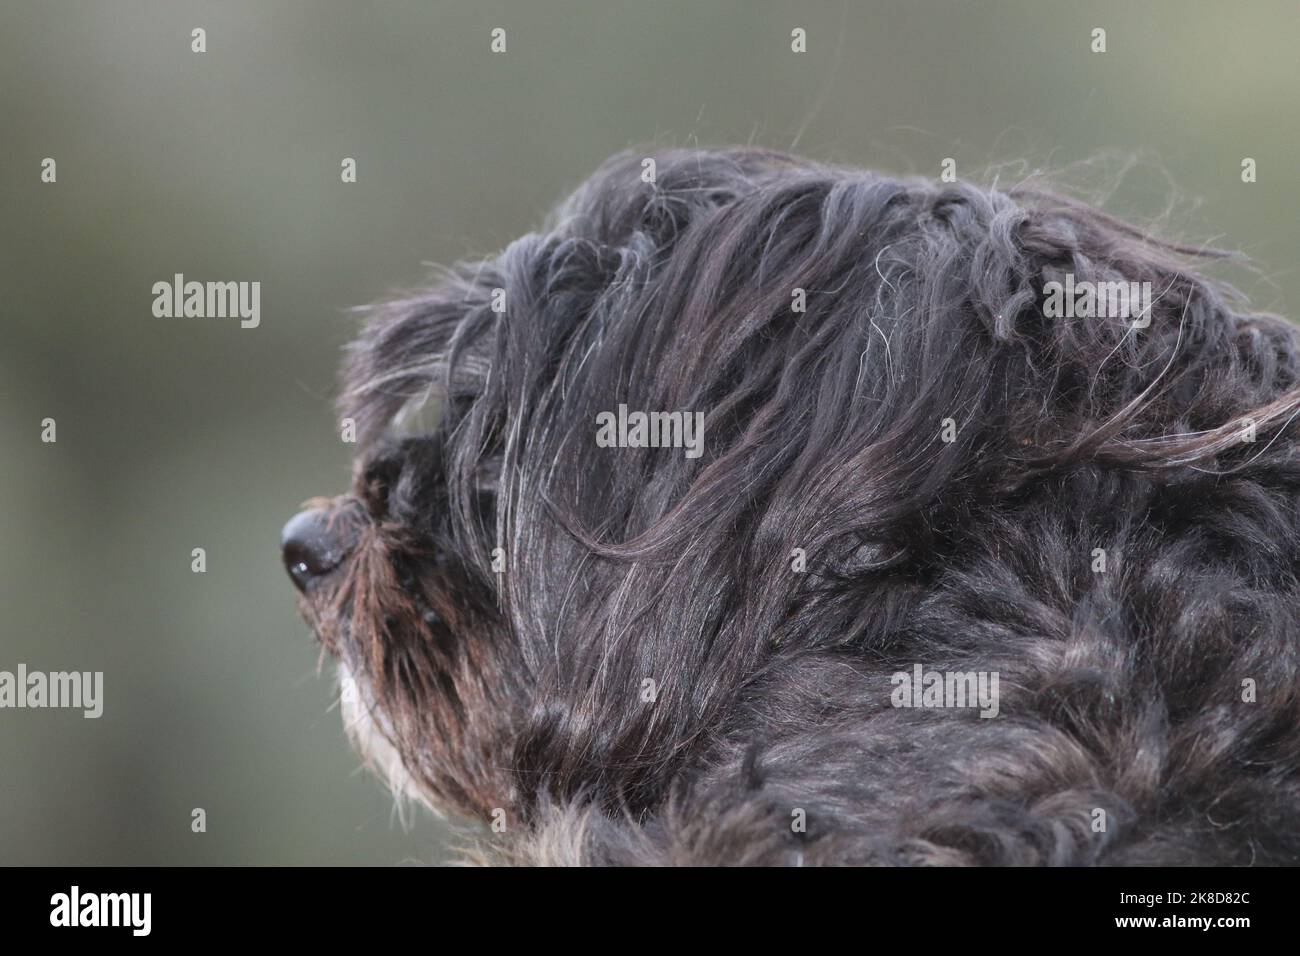 Sooty the black and white Maltese cross poodle dog looking away from camera and into the distance Stock Photo